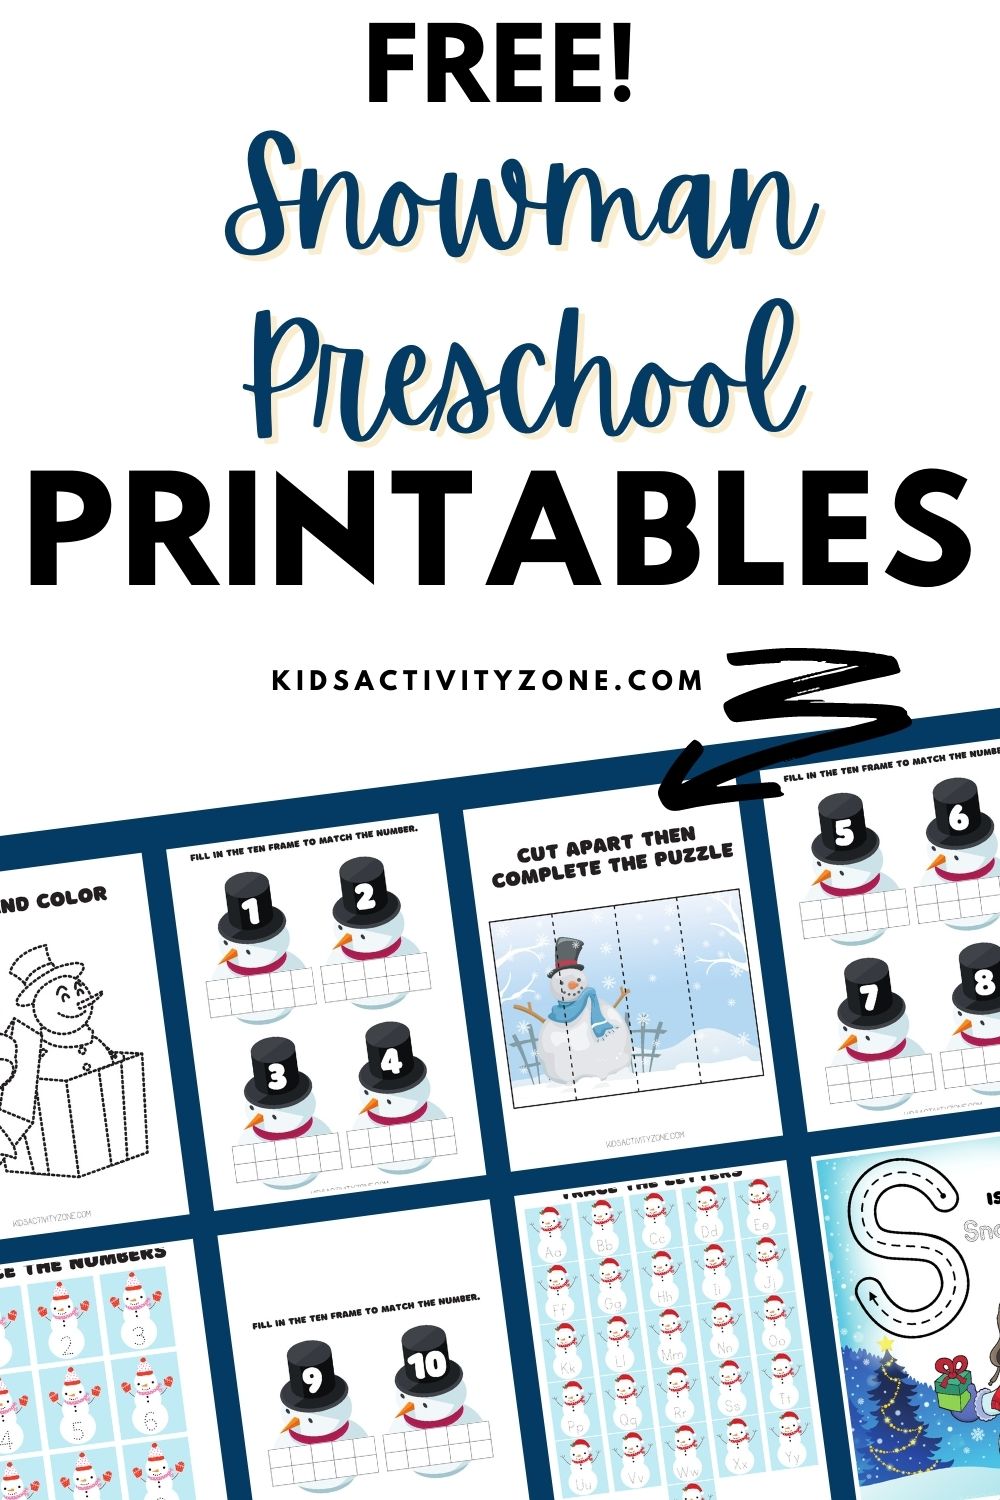 Free printable preschool worksheets that are snowman themed. Your kids or students will practice tracing numbers, tracing lines, tracing letters, cutting and doing fill in the ten boxes. They are a free download so grab these preschool worksheets. 